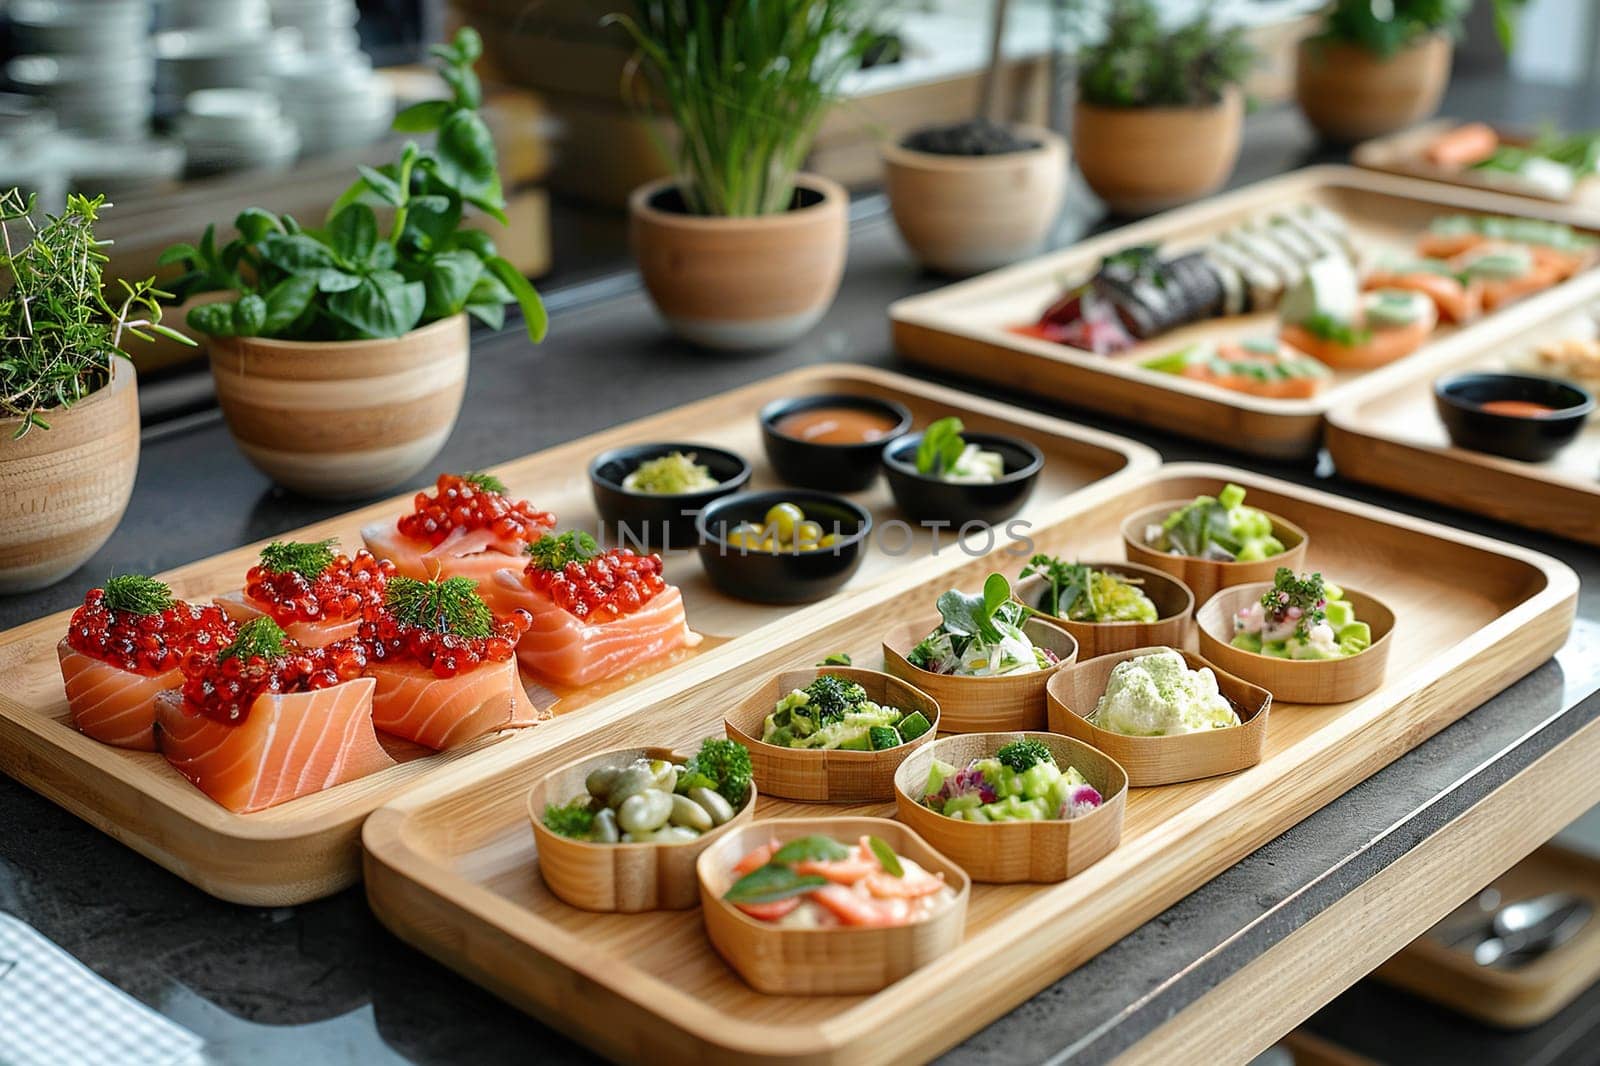 Modern catering. Light snacks on wooden trays, professional food serving for an event or holiday.